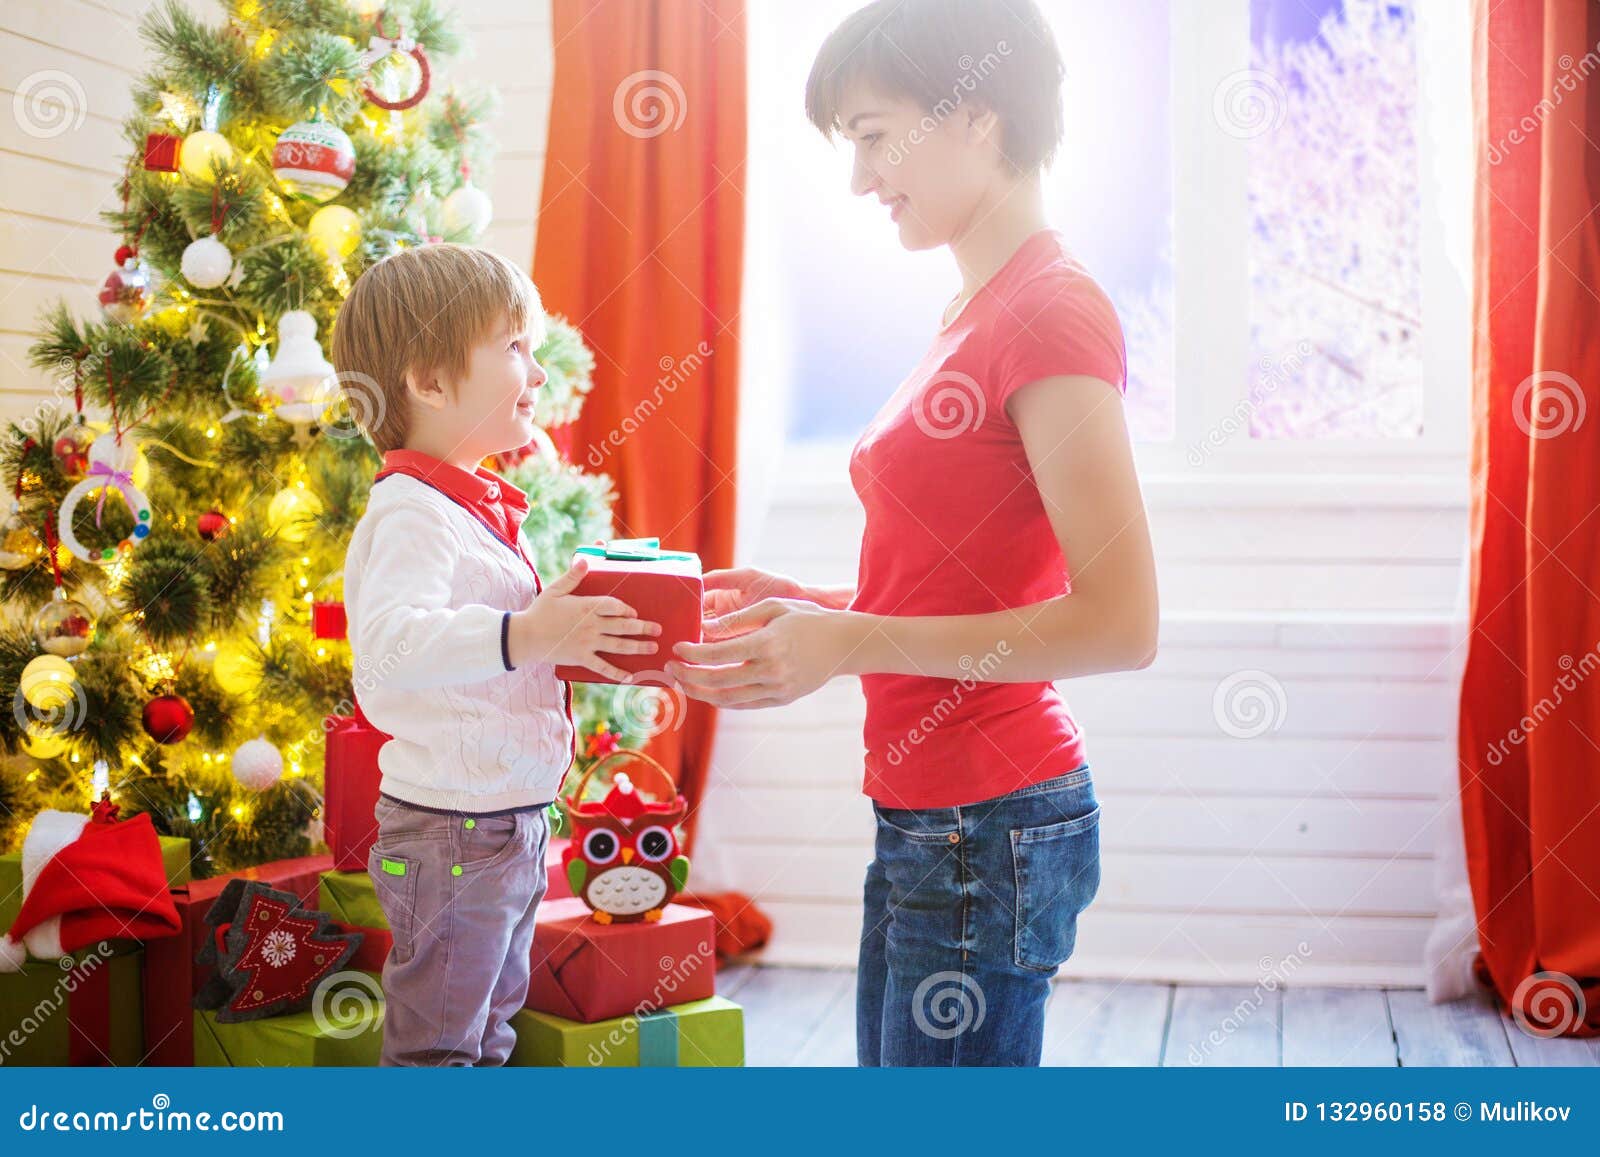 Mother Gives a Gift To Her Son for Christmas or Son Gives a Gift To His